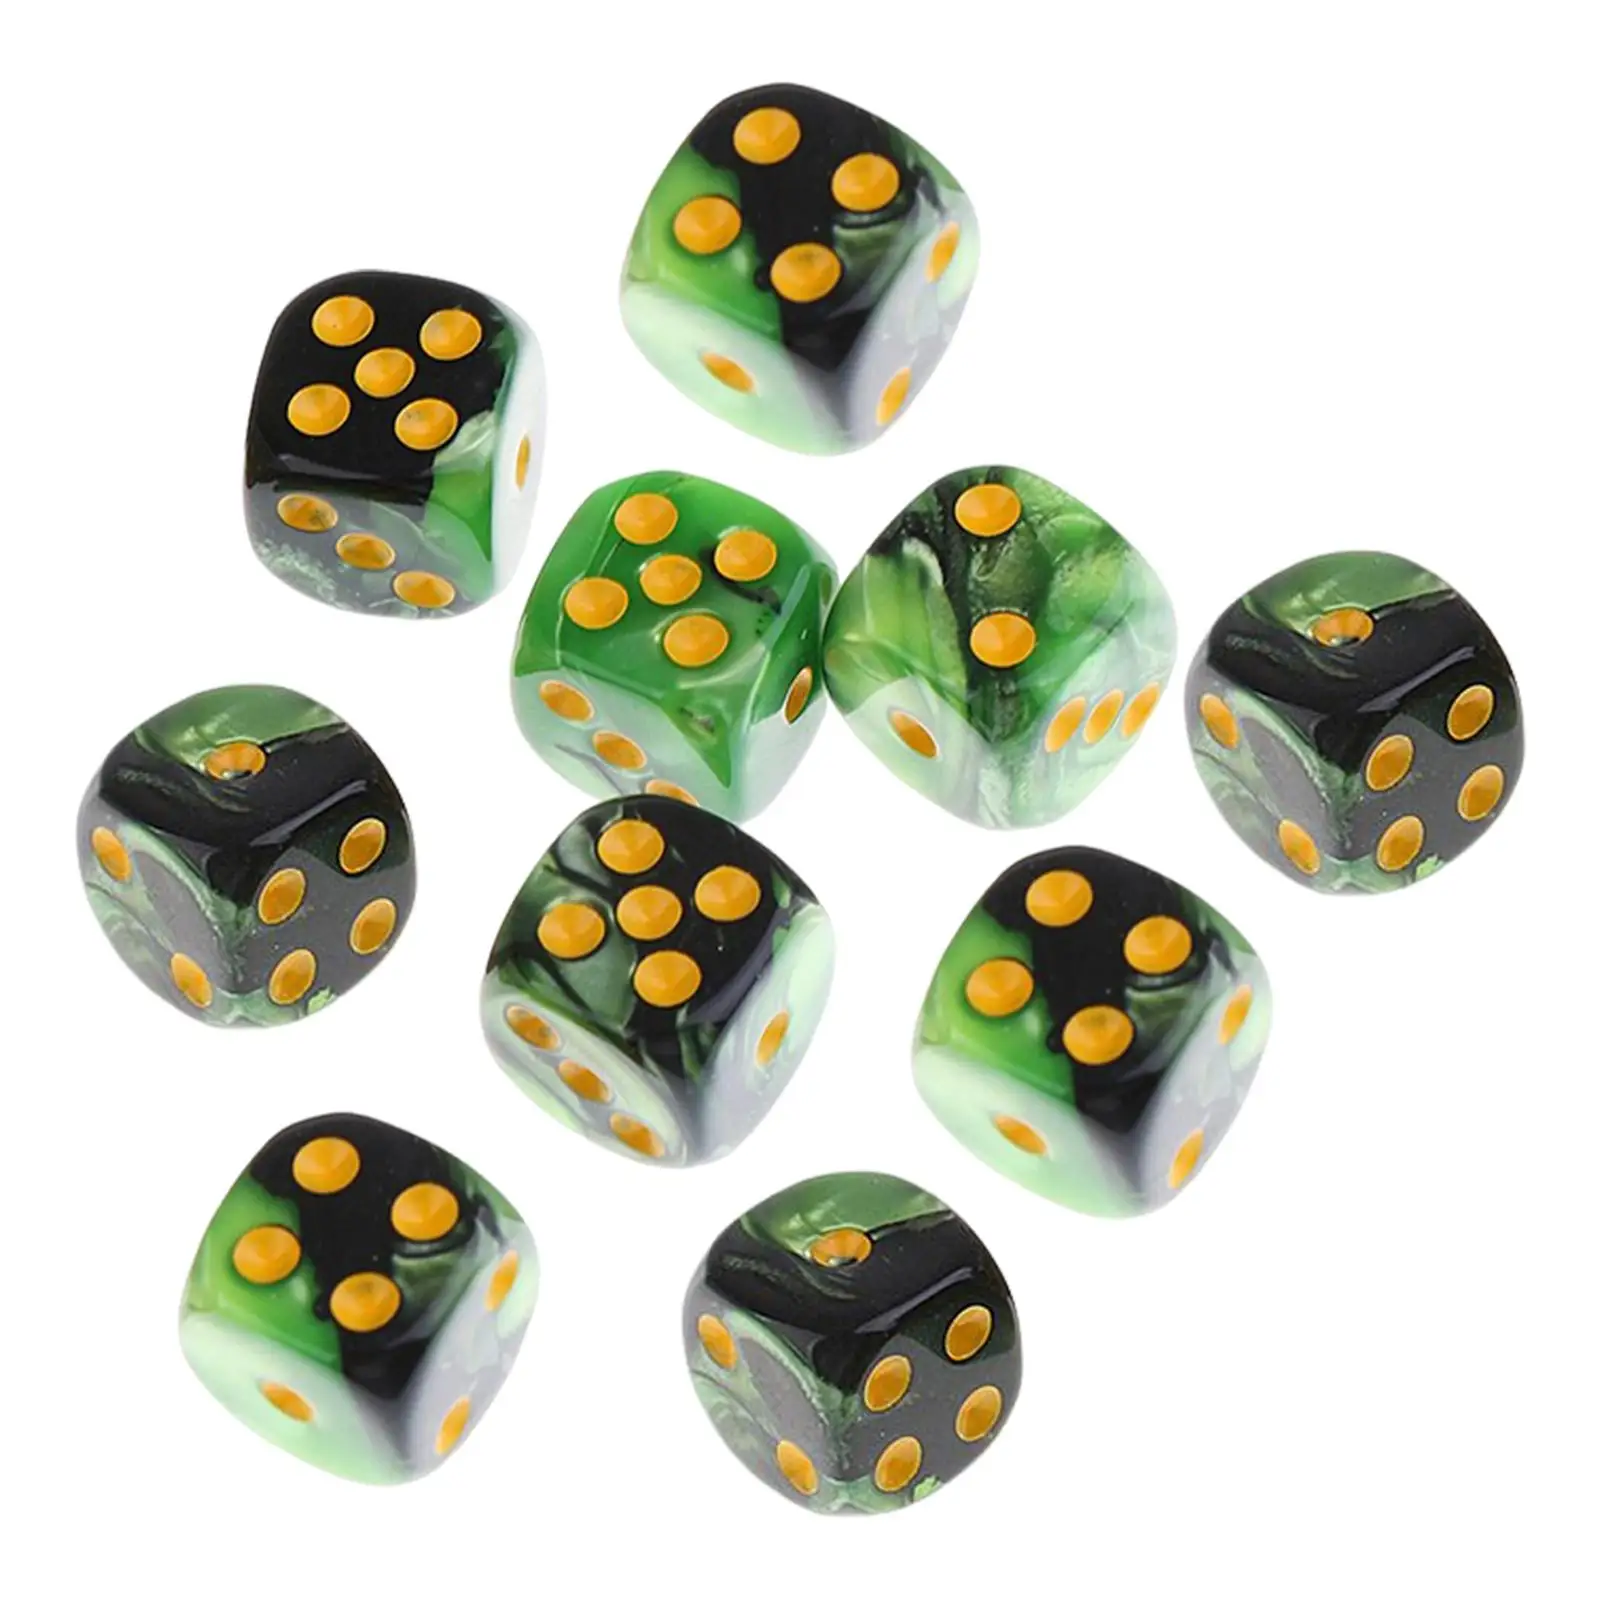 Set of 10 Six Sided Dices Set Toys Opaque for DND RPG Math Teaching Board Game